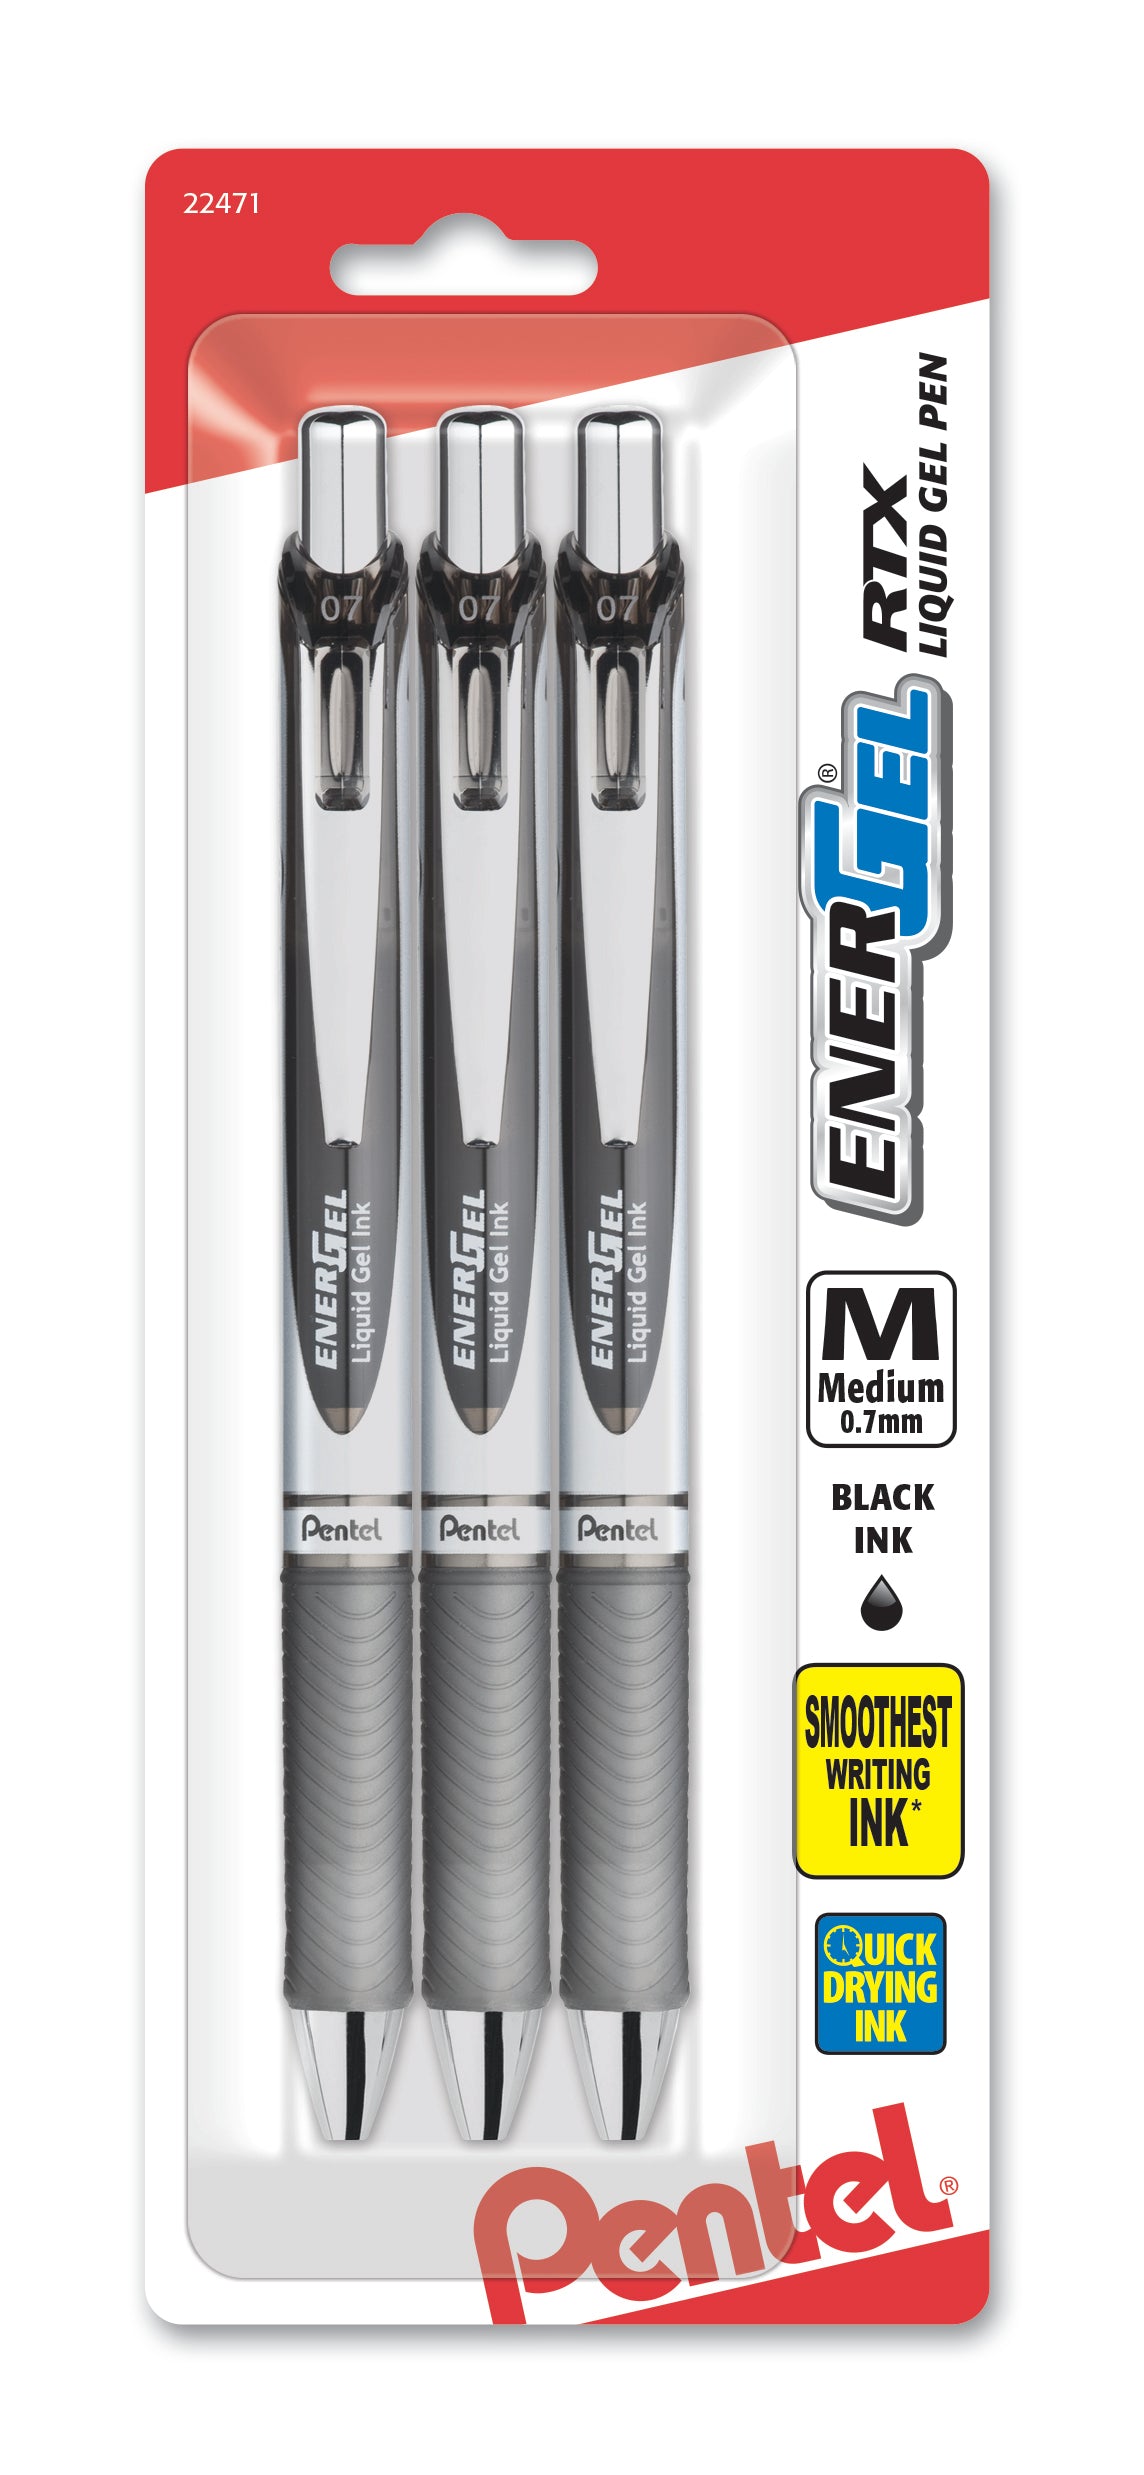 Pentel EnerGel 0.7 RTX Liquid Gel Ink Pens With Refills, Black Ink, Med  Point, BL77A FREE SHIPPING